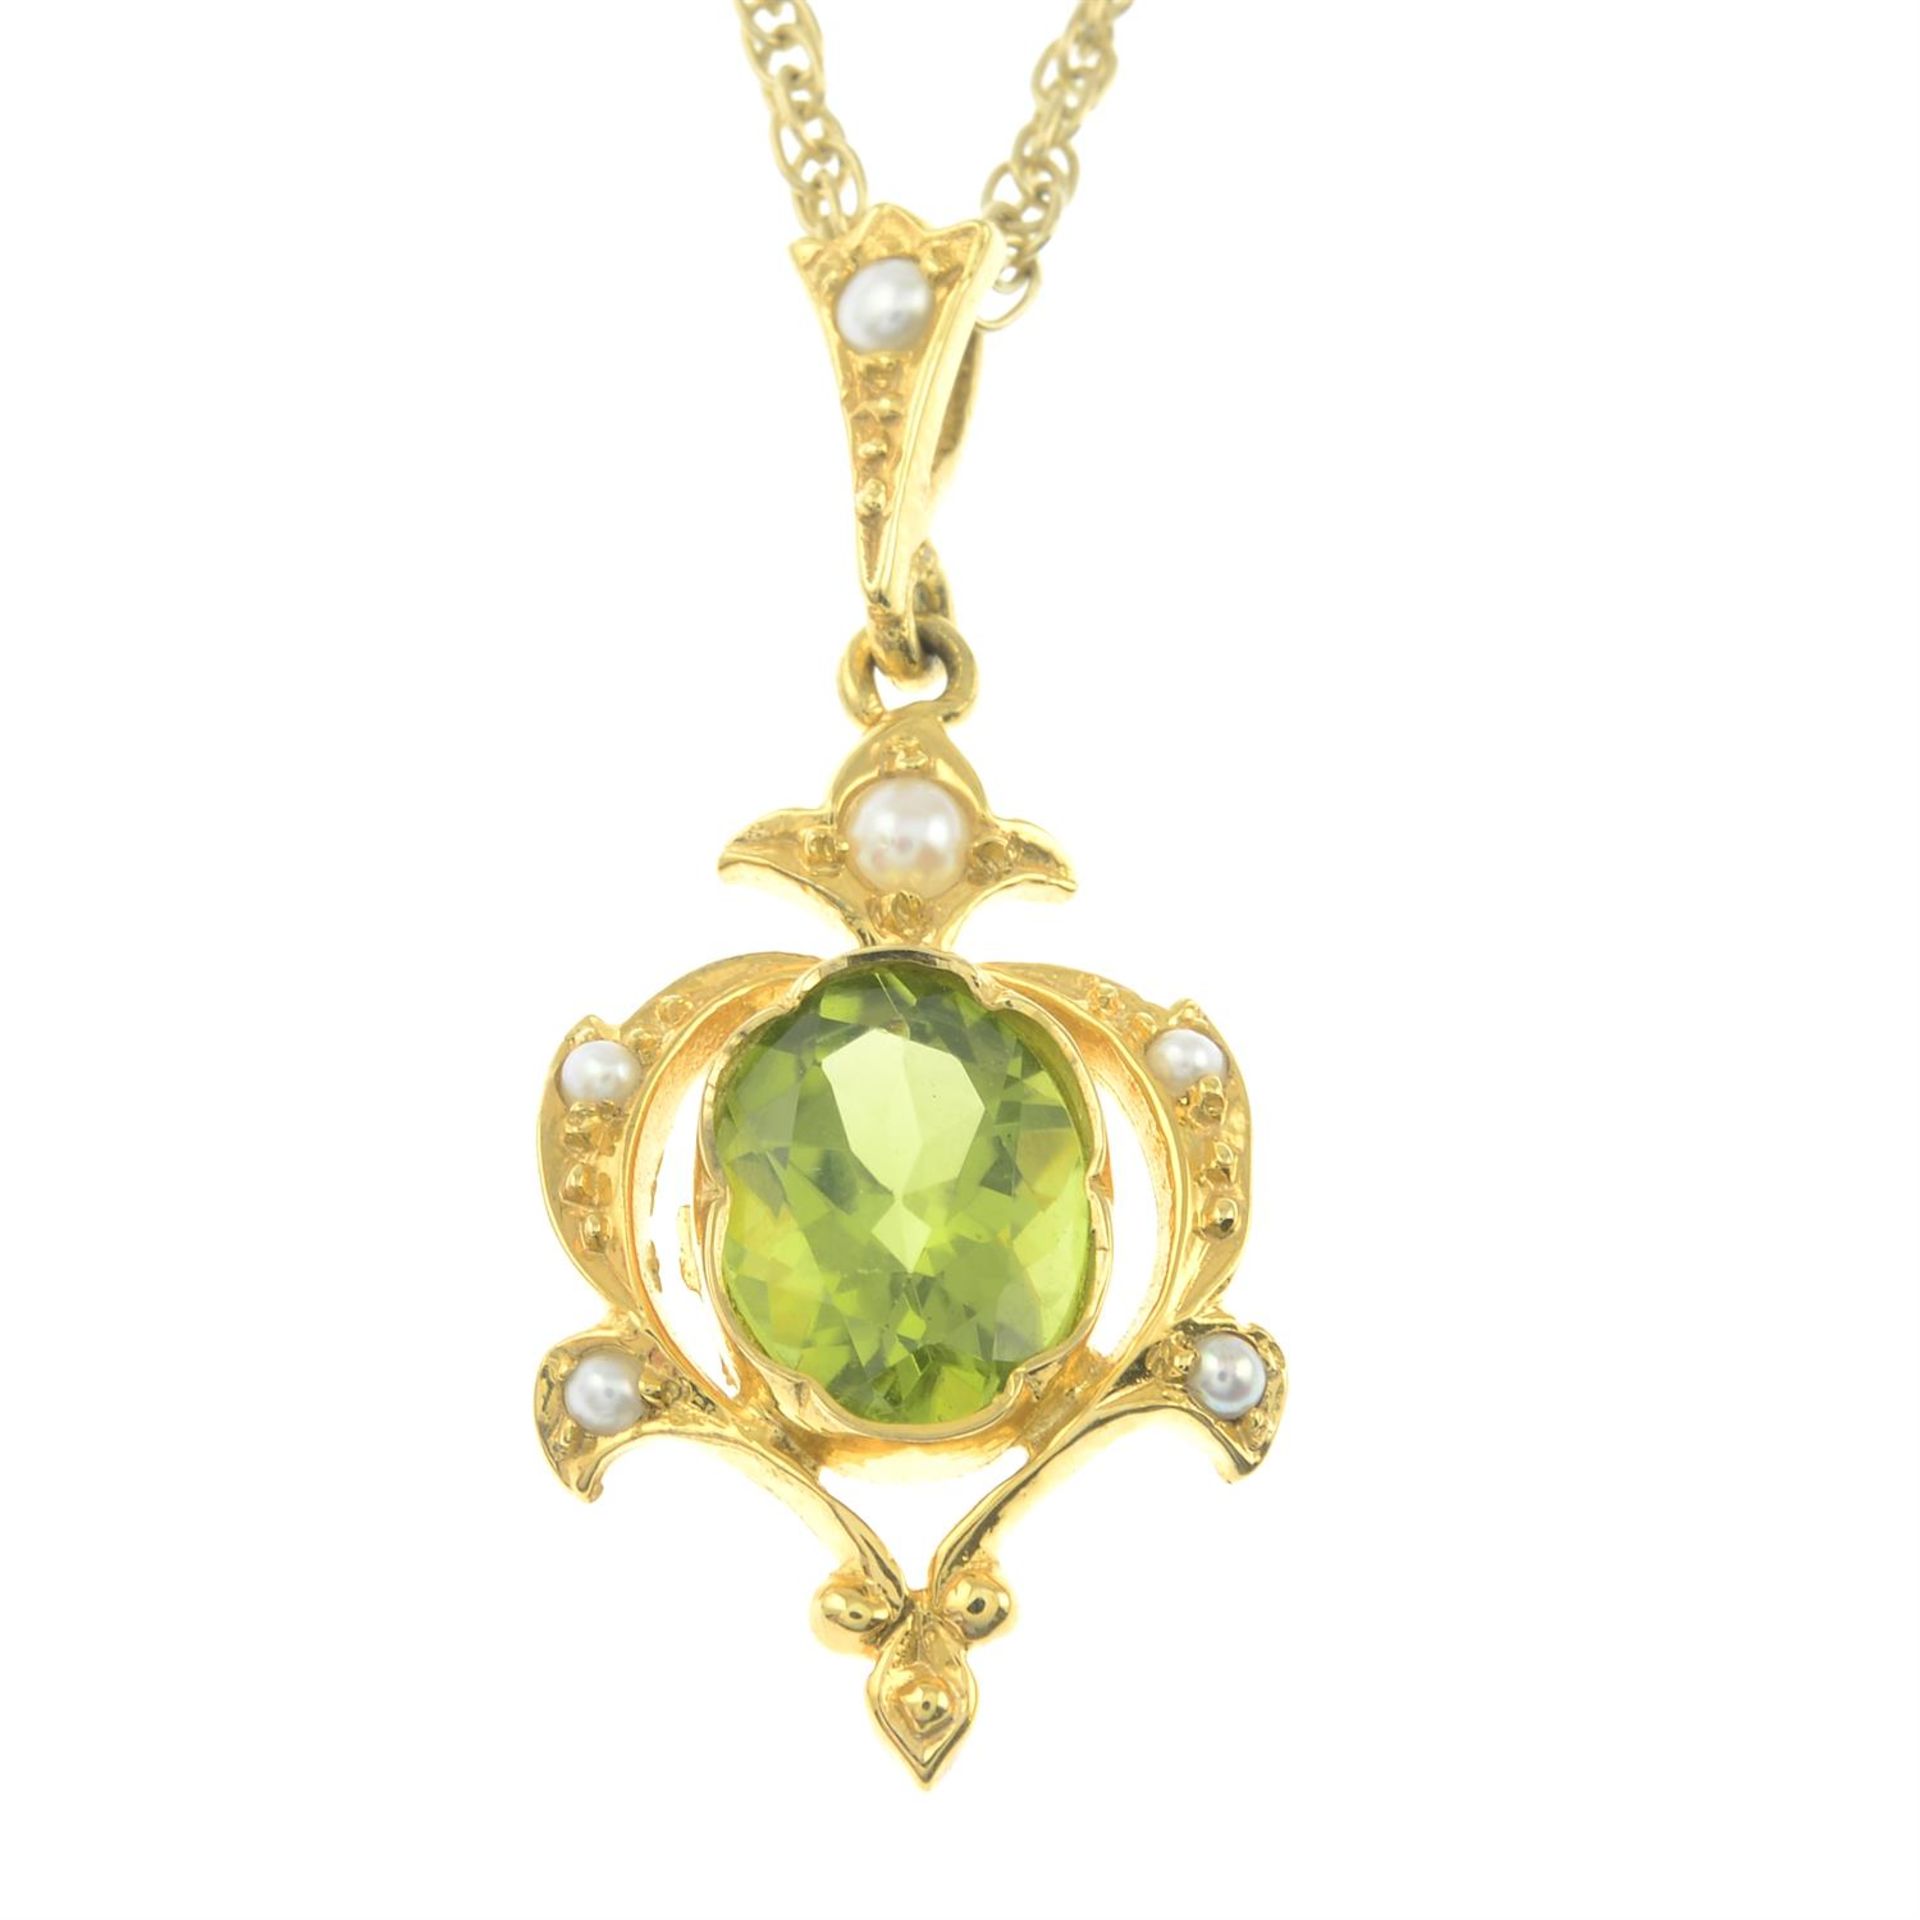 A 9ct gold peridot and split pearl pendant, on chain.